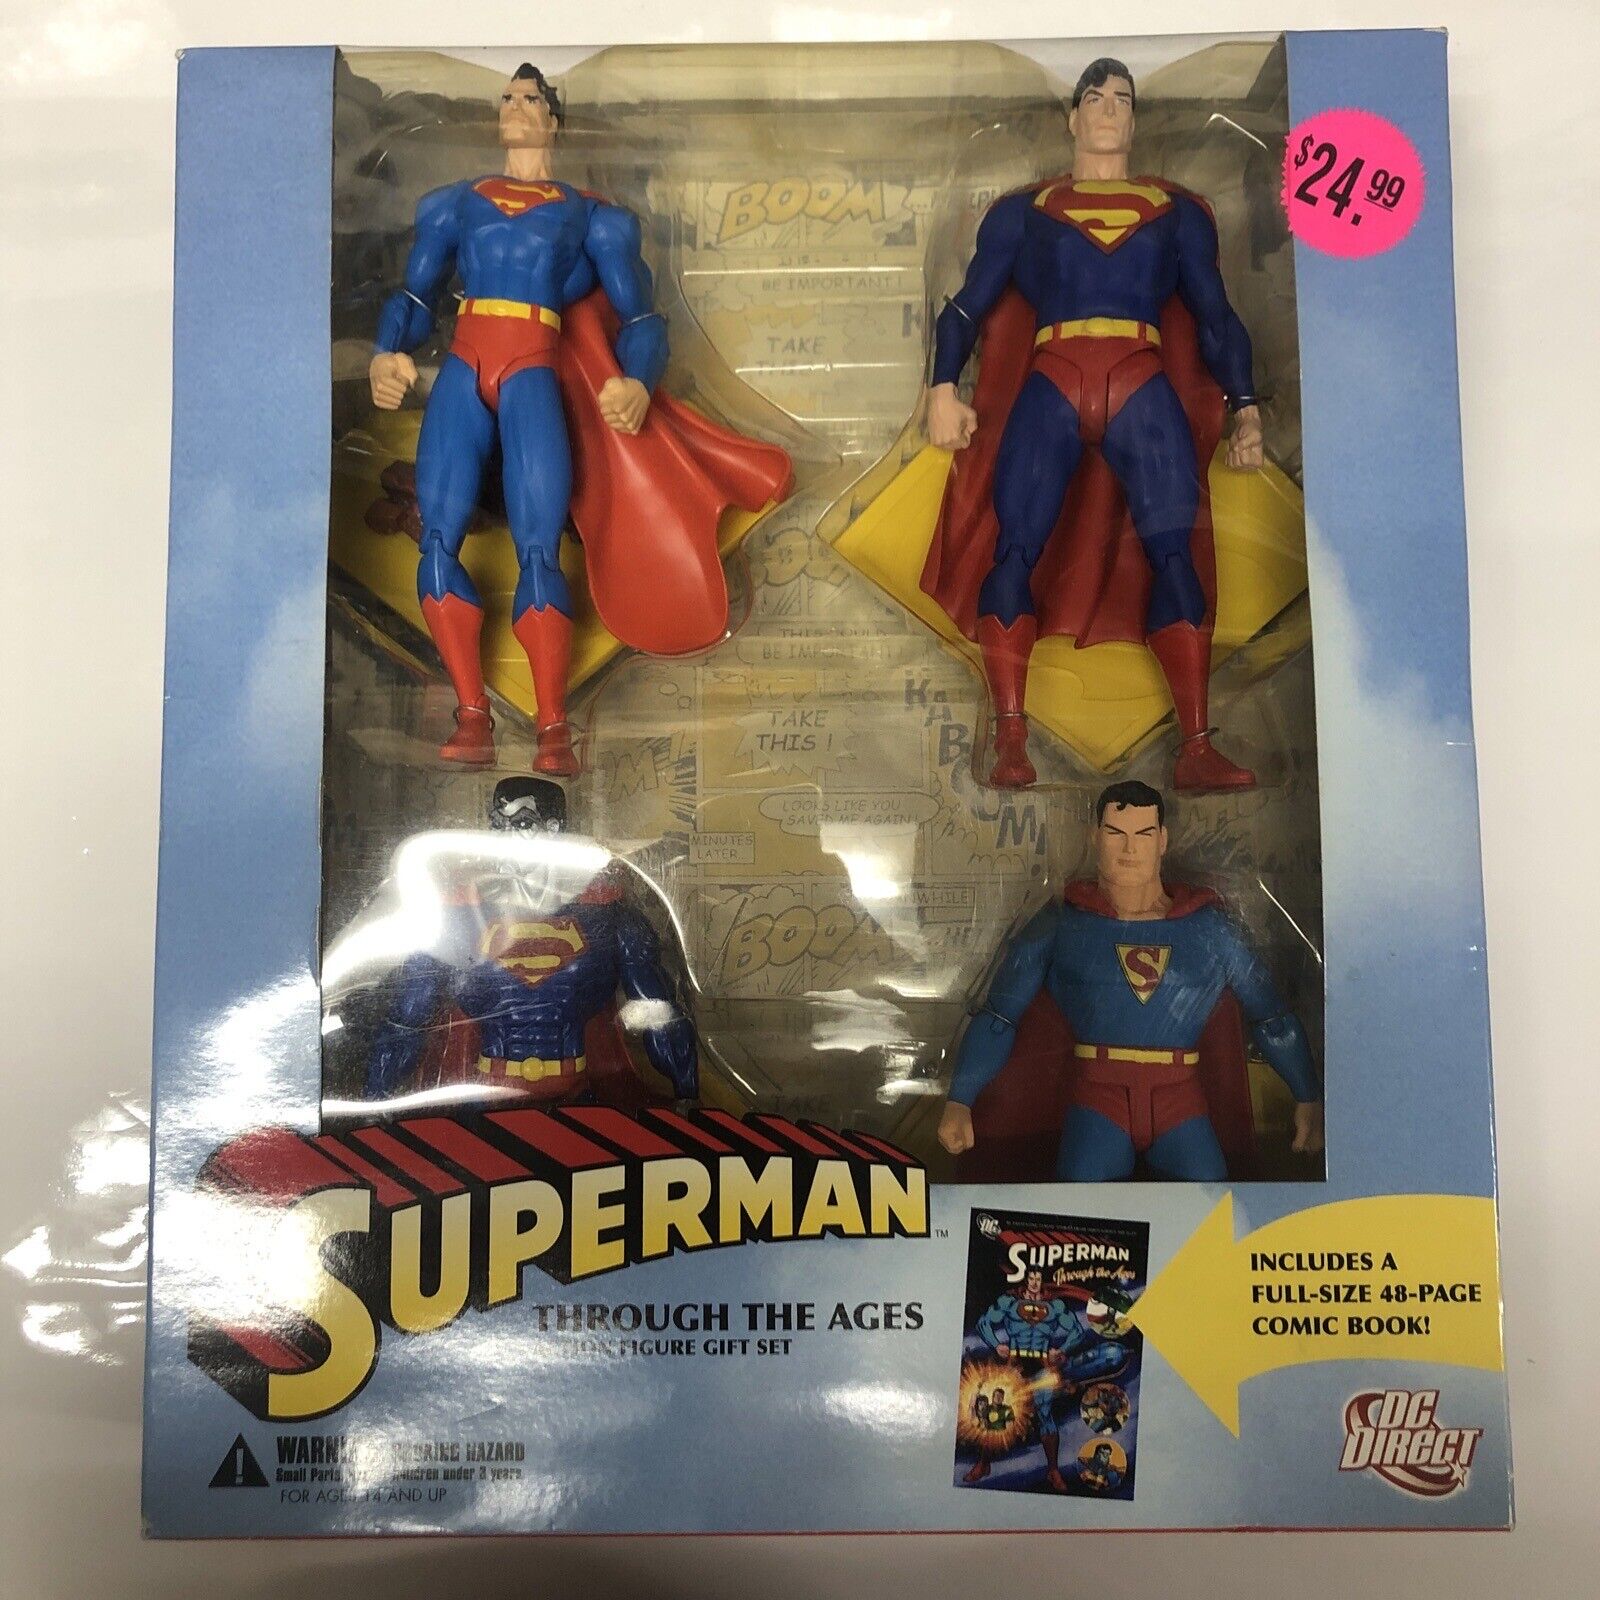 Superman Through The Ages (2006) • DC Direct Products • Action Figure Set